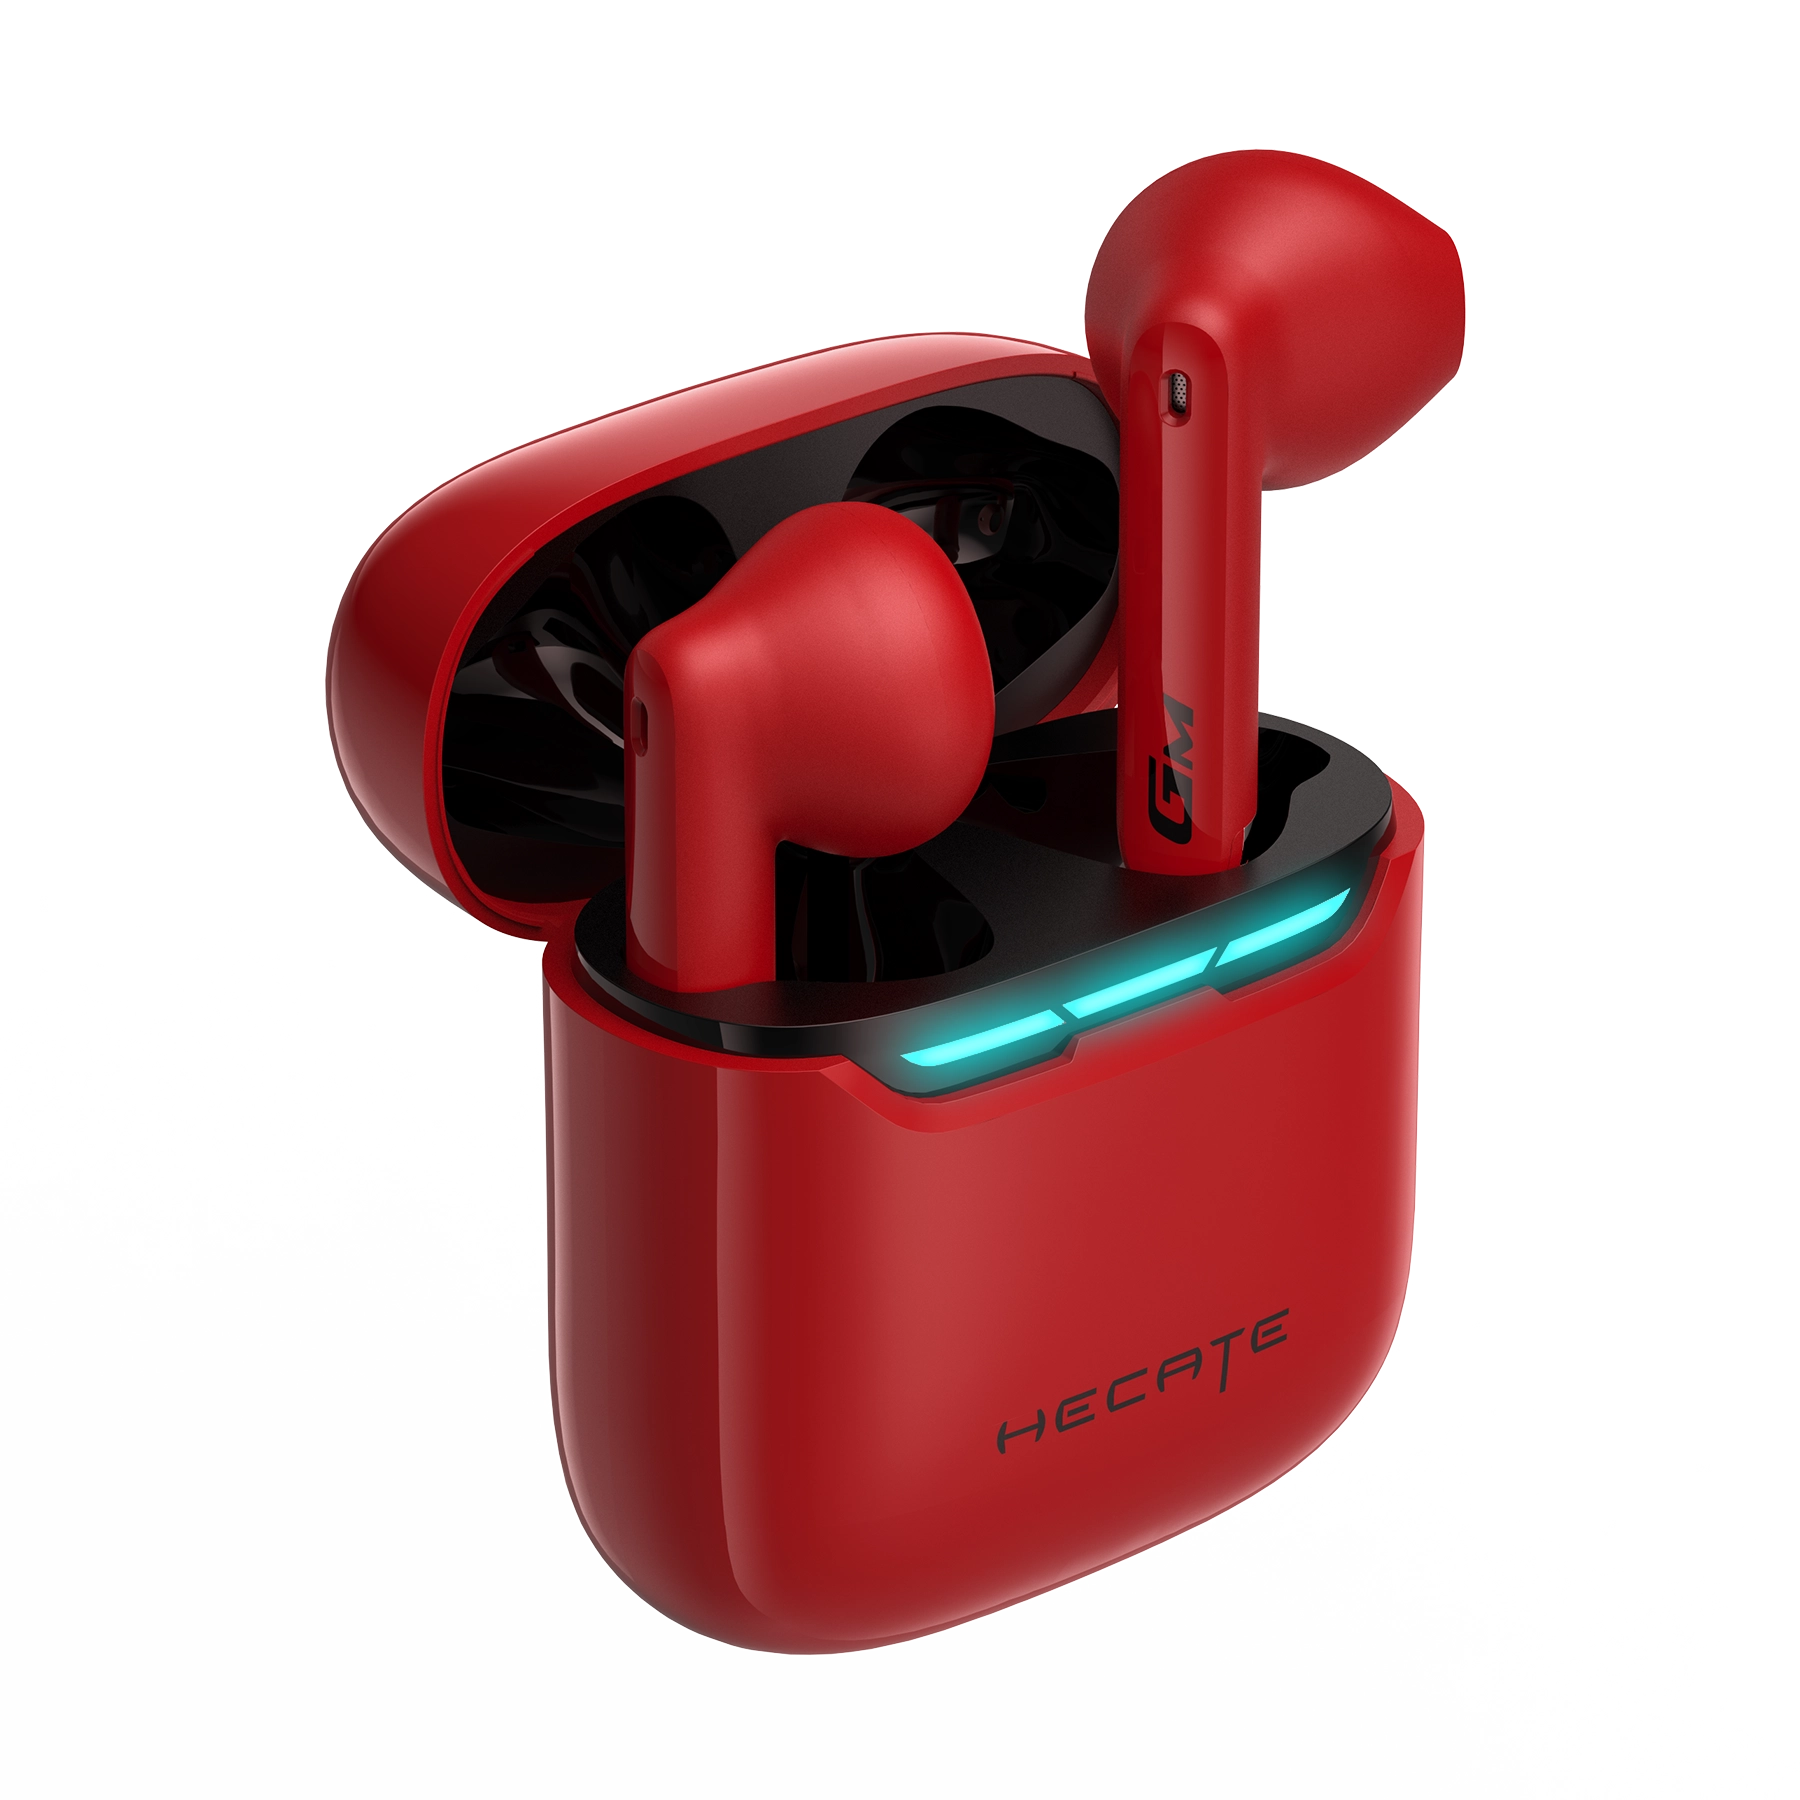 GM3 Plus Wireless Earbuds Product Pictures red_4